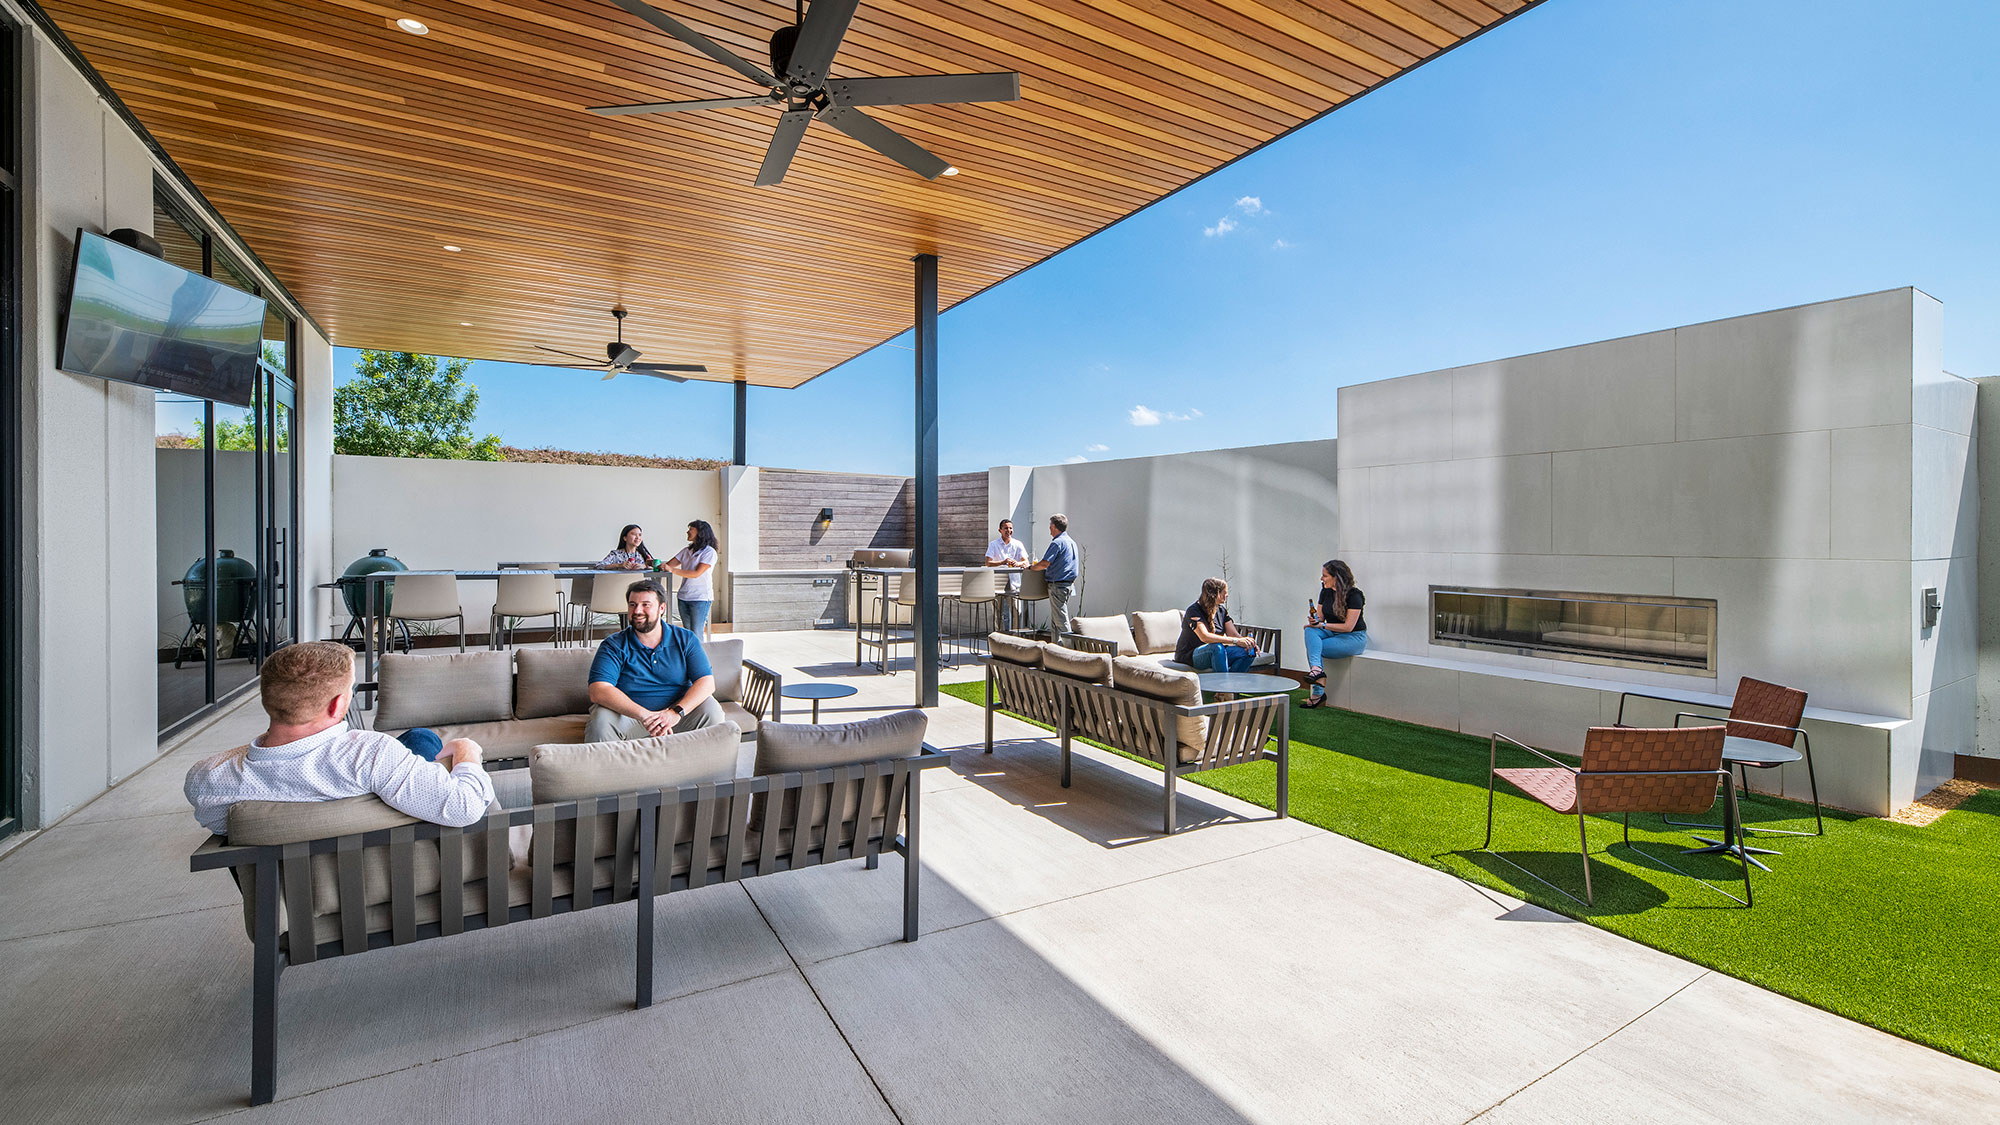 People working and socializing in an outdoor rooftop workspace.